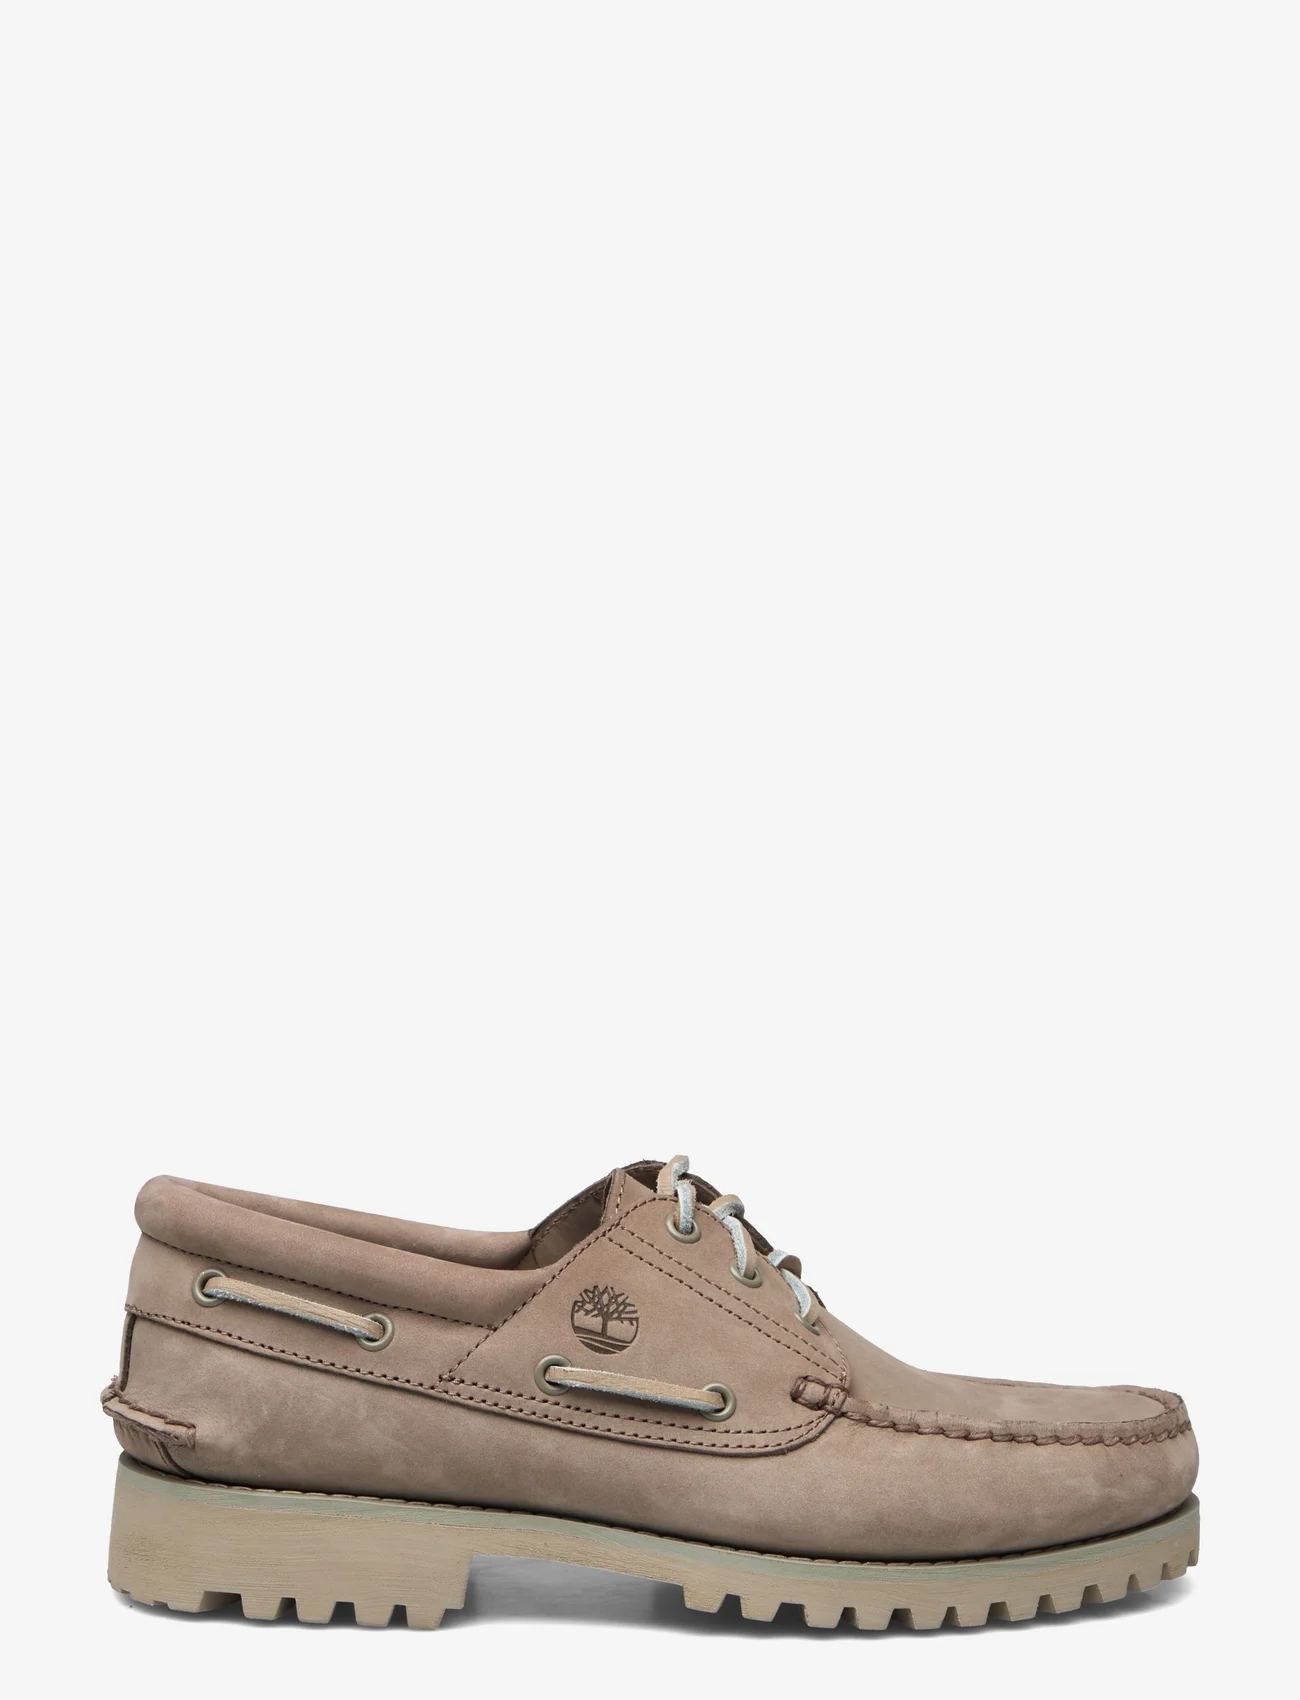 Timberland - Timberland Authentic BOAT SHOE LIGHT TAUPE NUBUCK - spring shoes - light taupe nubuck - 1